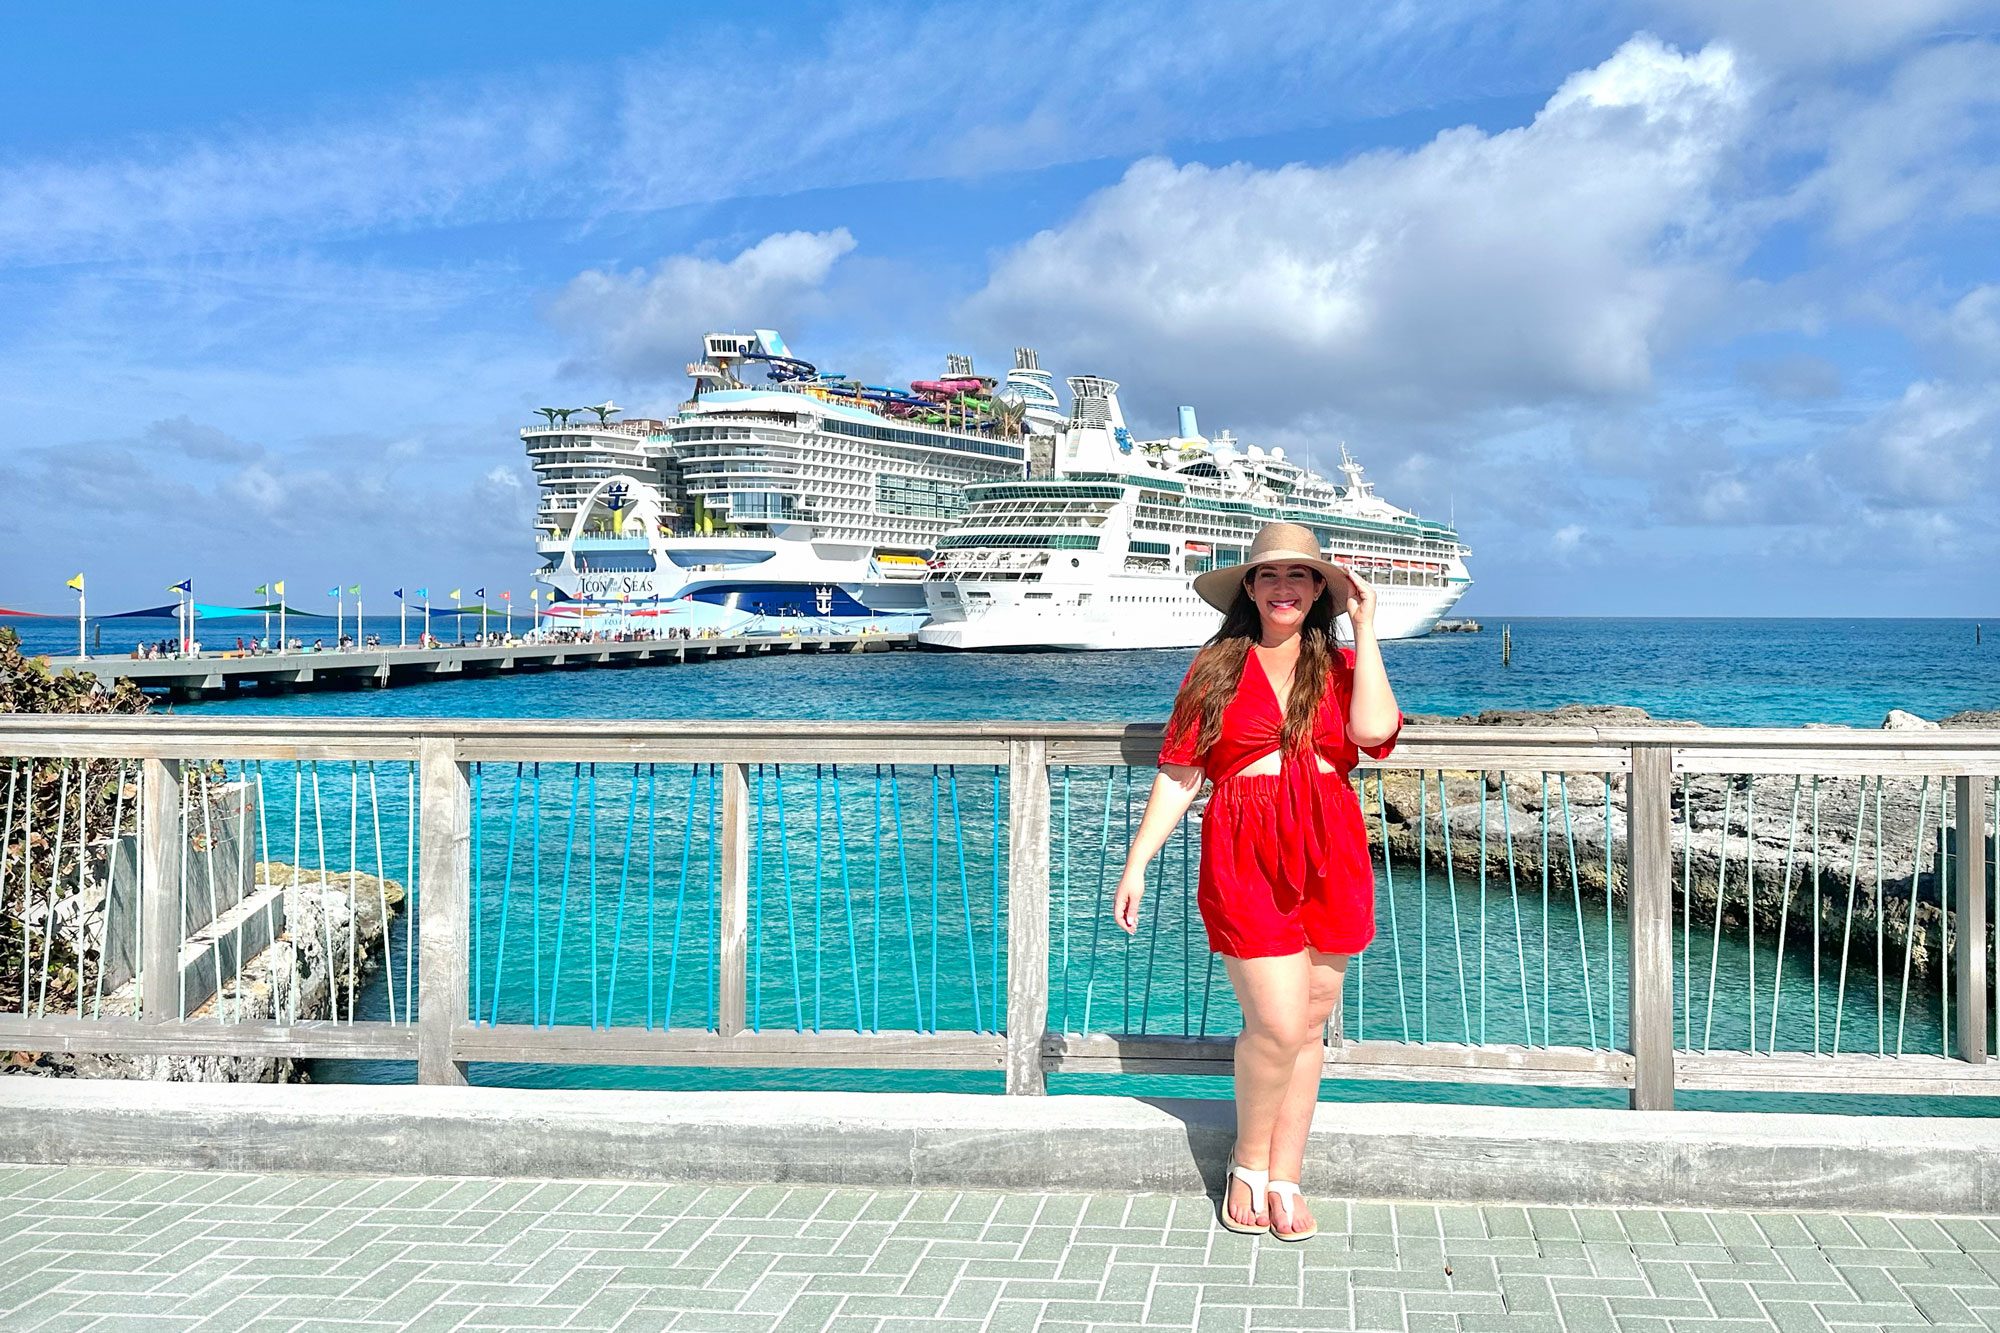 A Lady in front of World's Biggest Cruise Ship Icon of the Seas